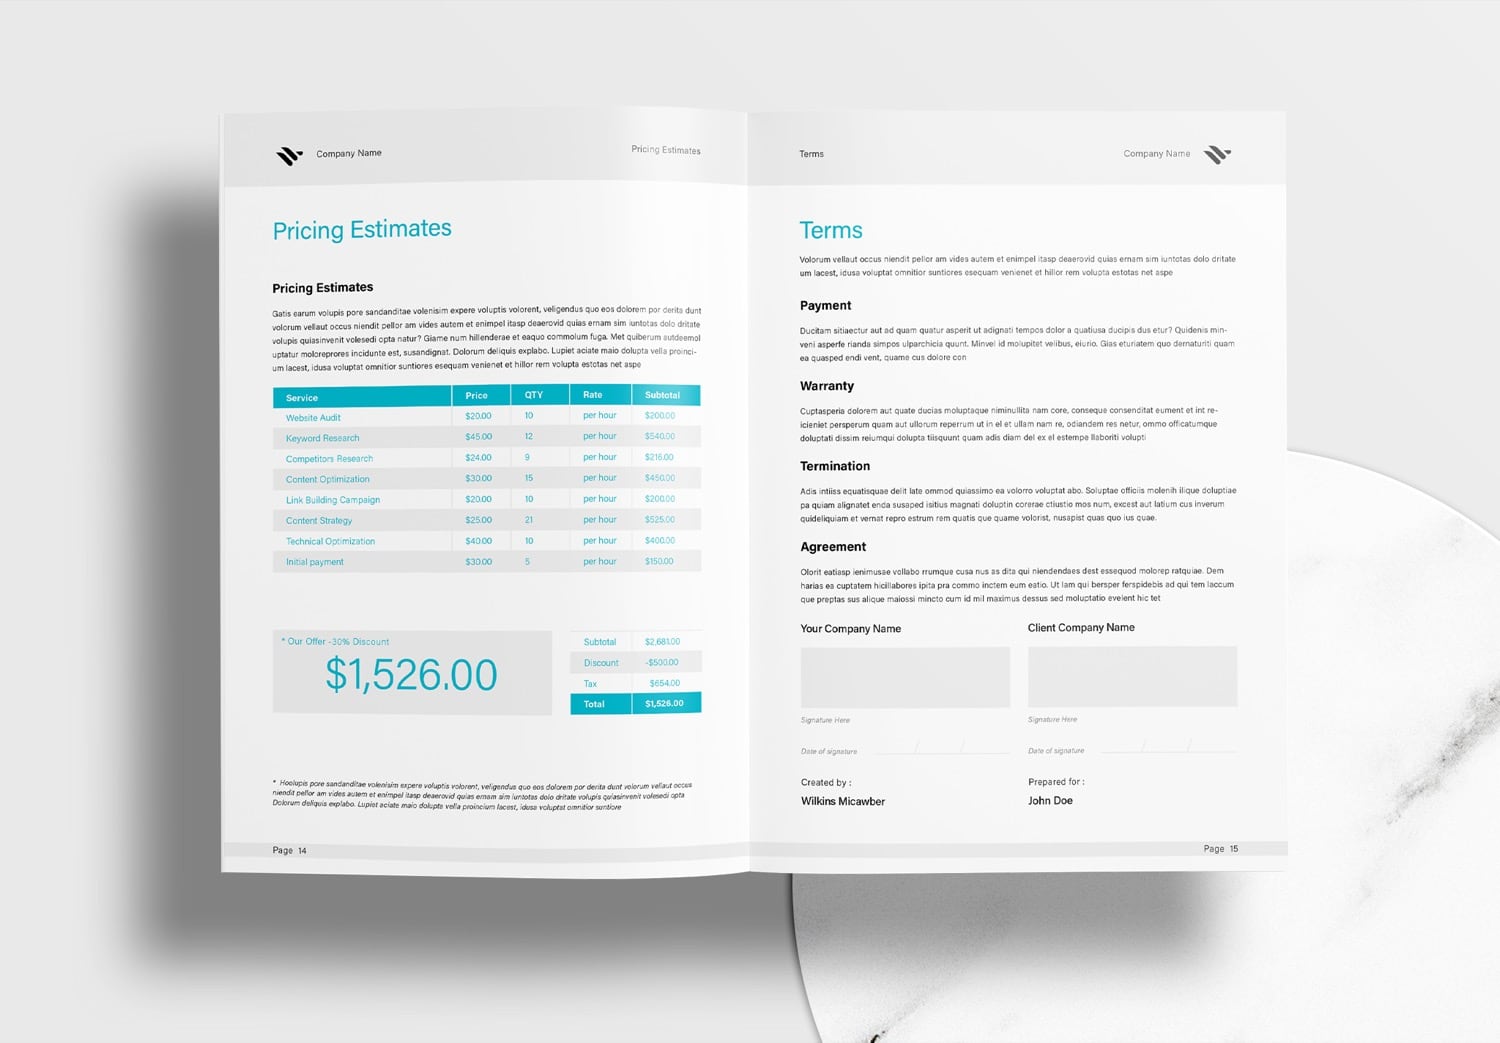 Free InDesign Business Proposal Template with Blue Accents